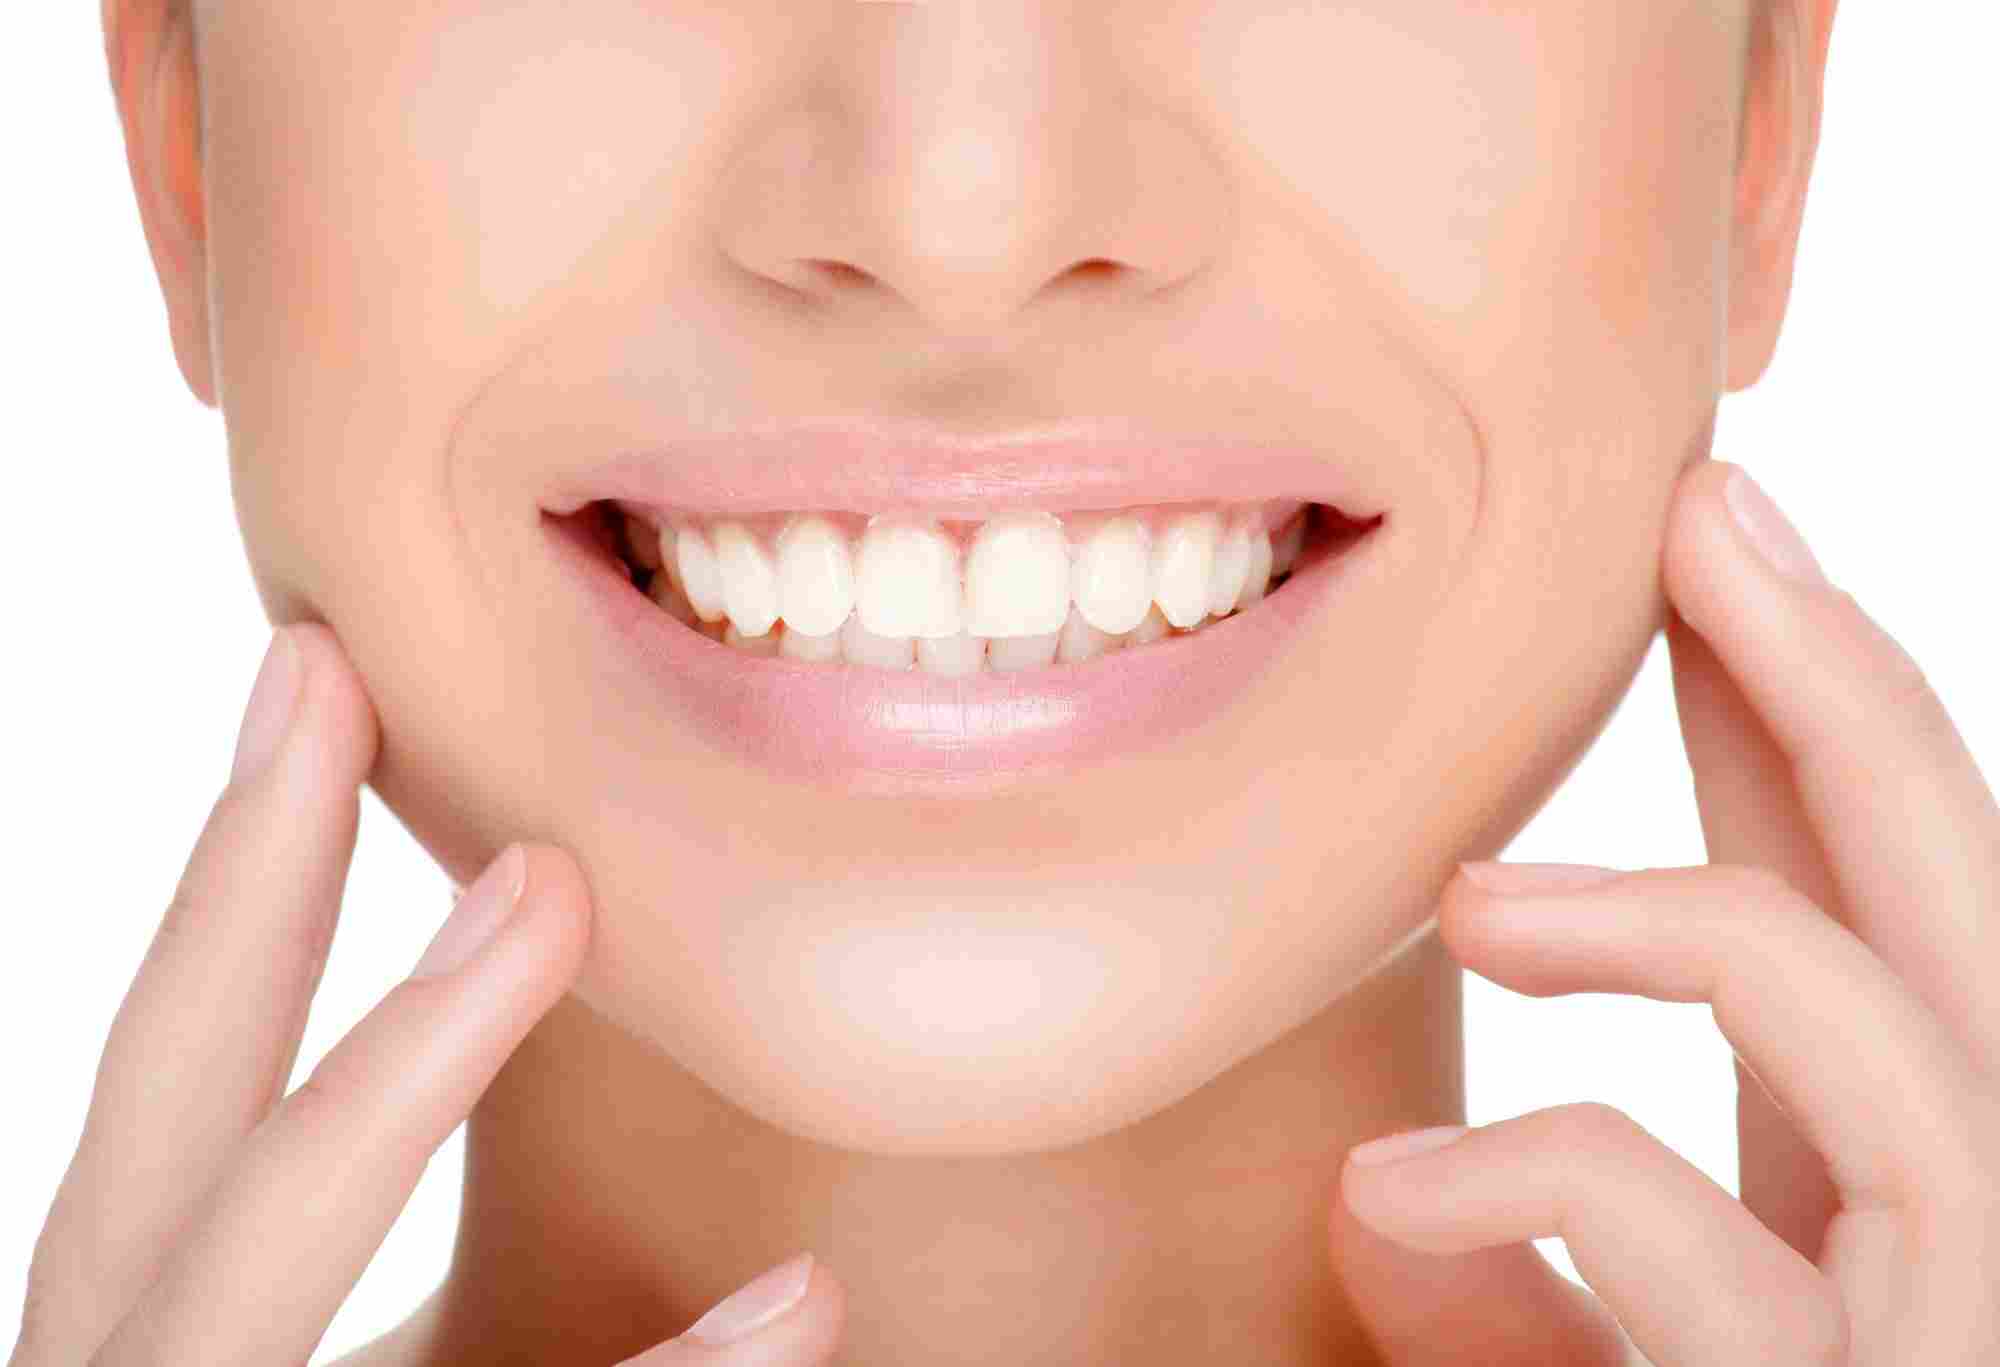 Teeth Whitening: Things That Work And Things That Don’t